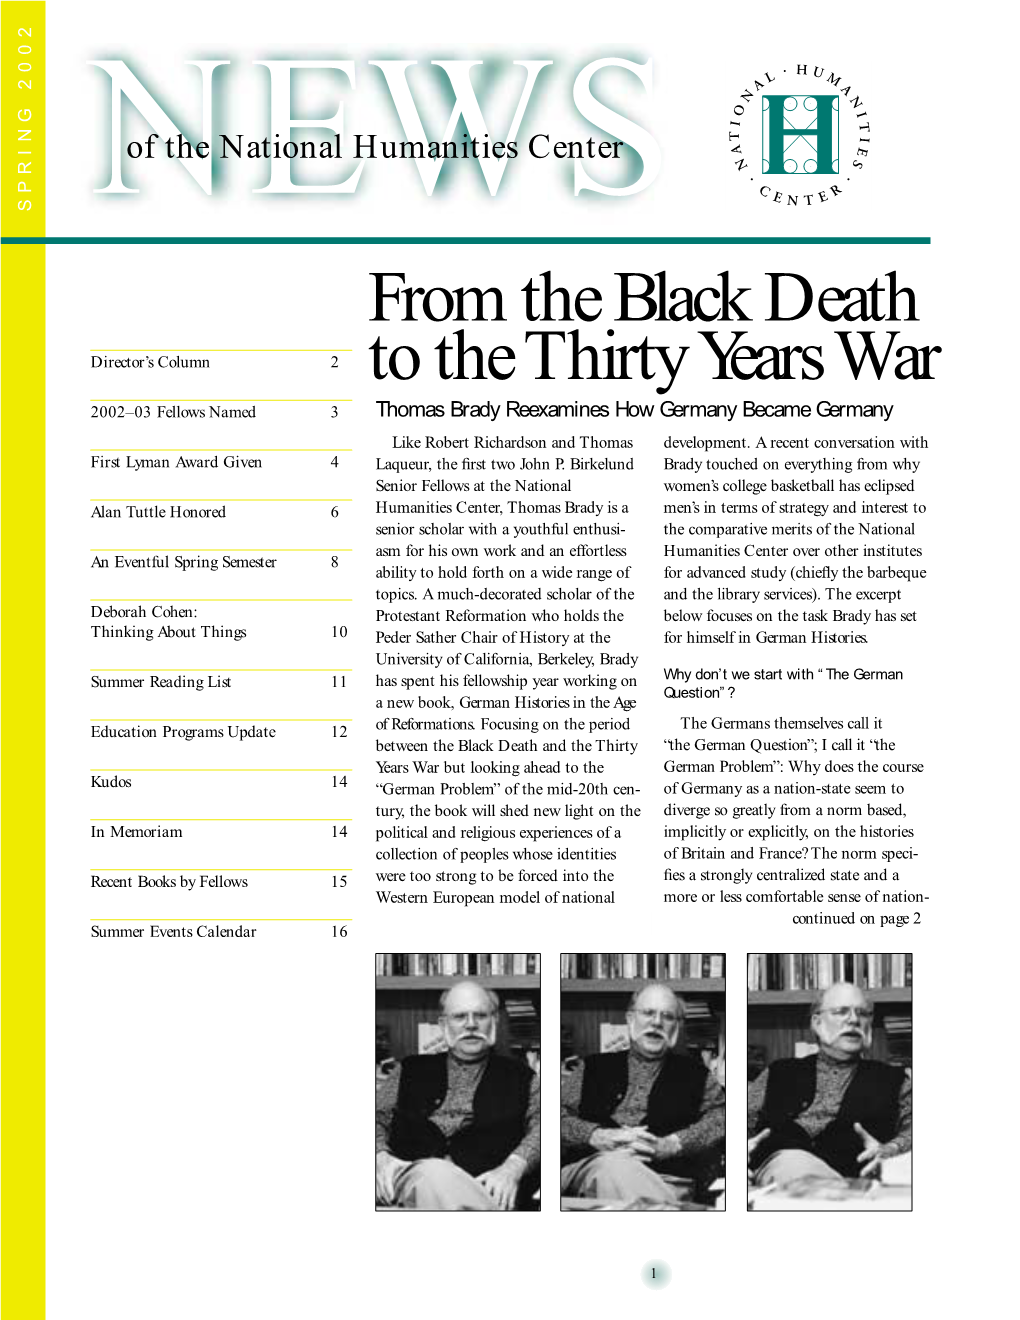 From the Black Death to the Thirty Years